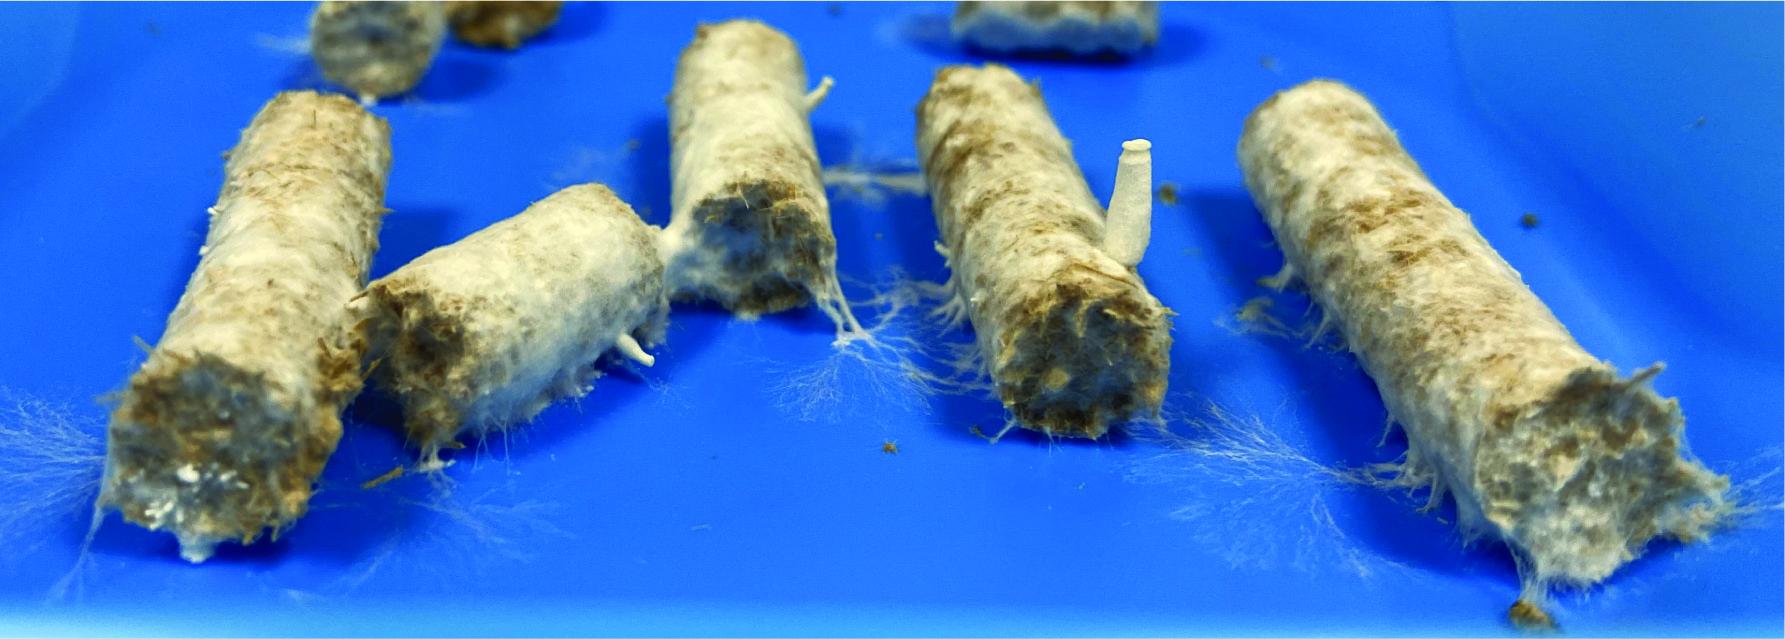 Printed waste-based rods bound by fungus